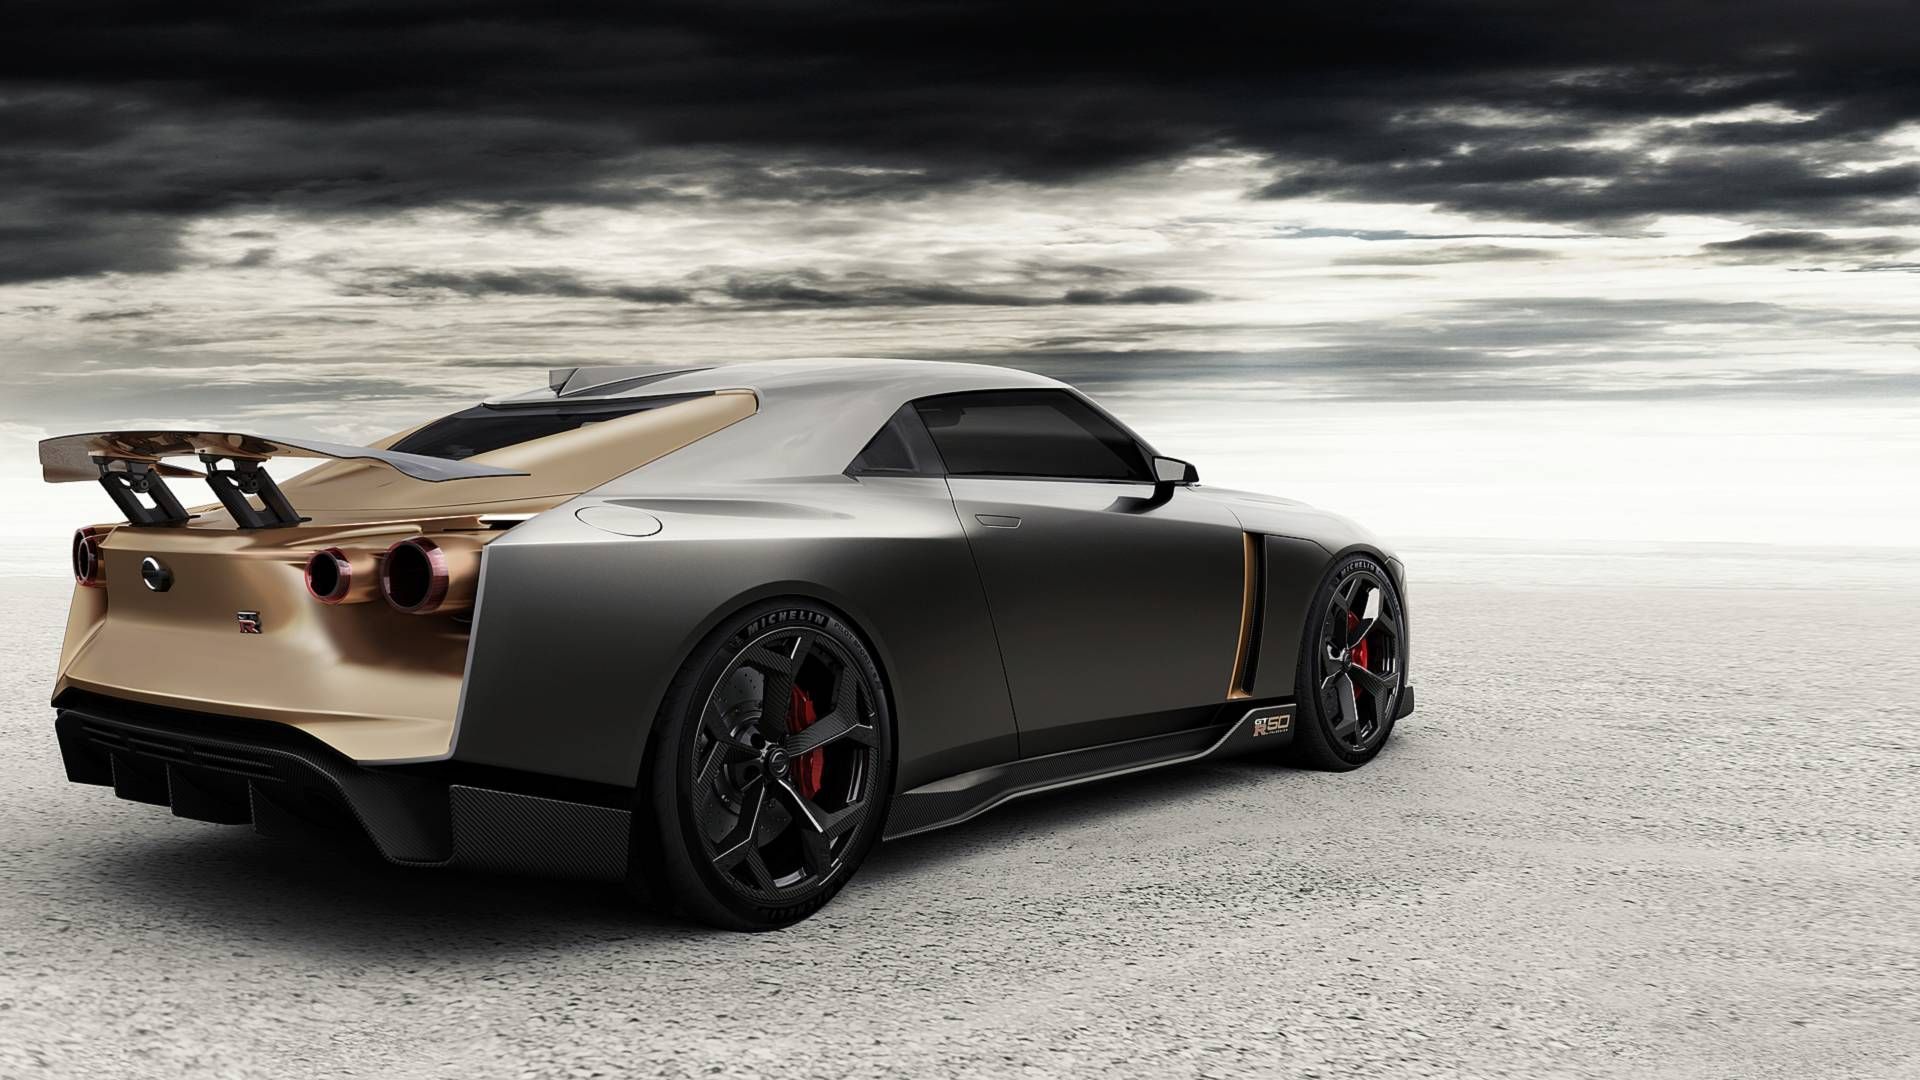 The Italdesign GT R50 renewed interest in Nissan's aging supercar